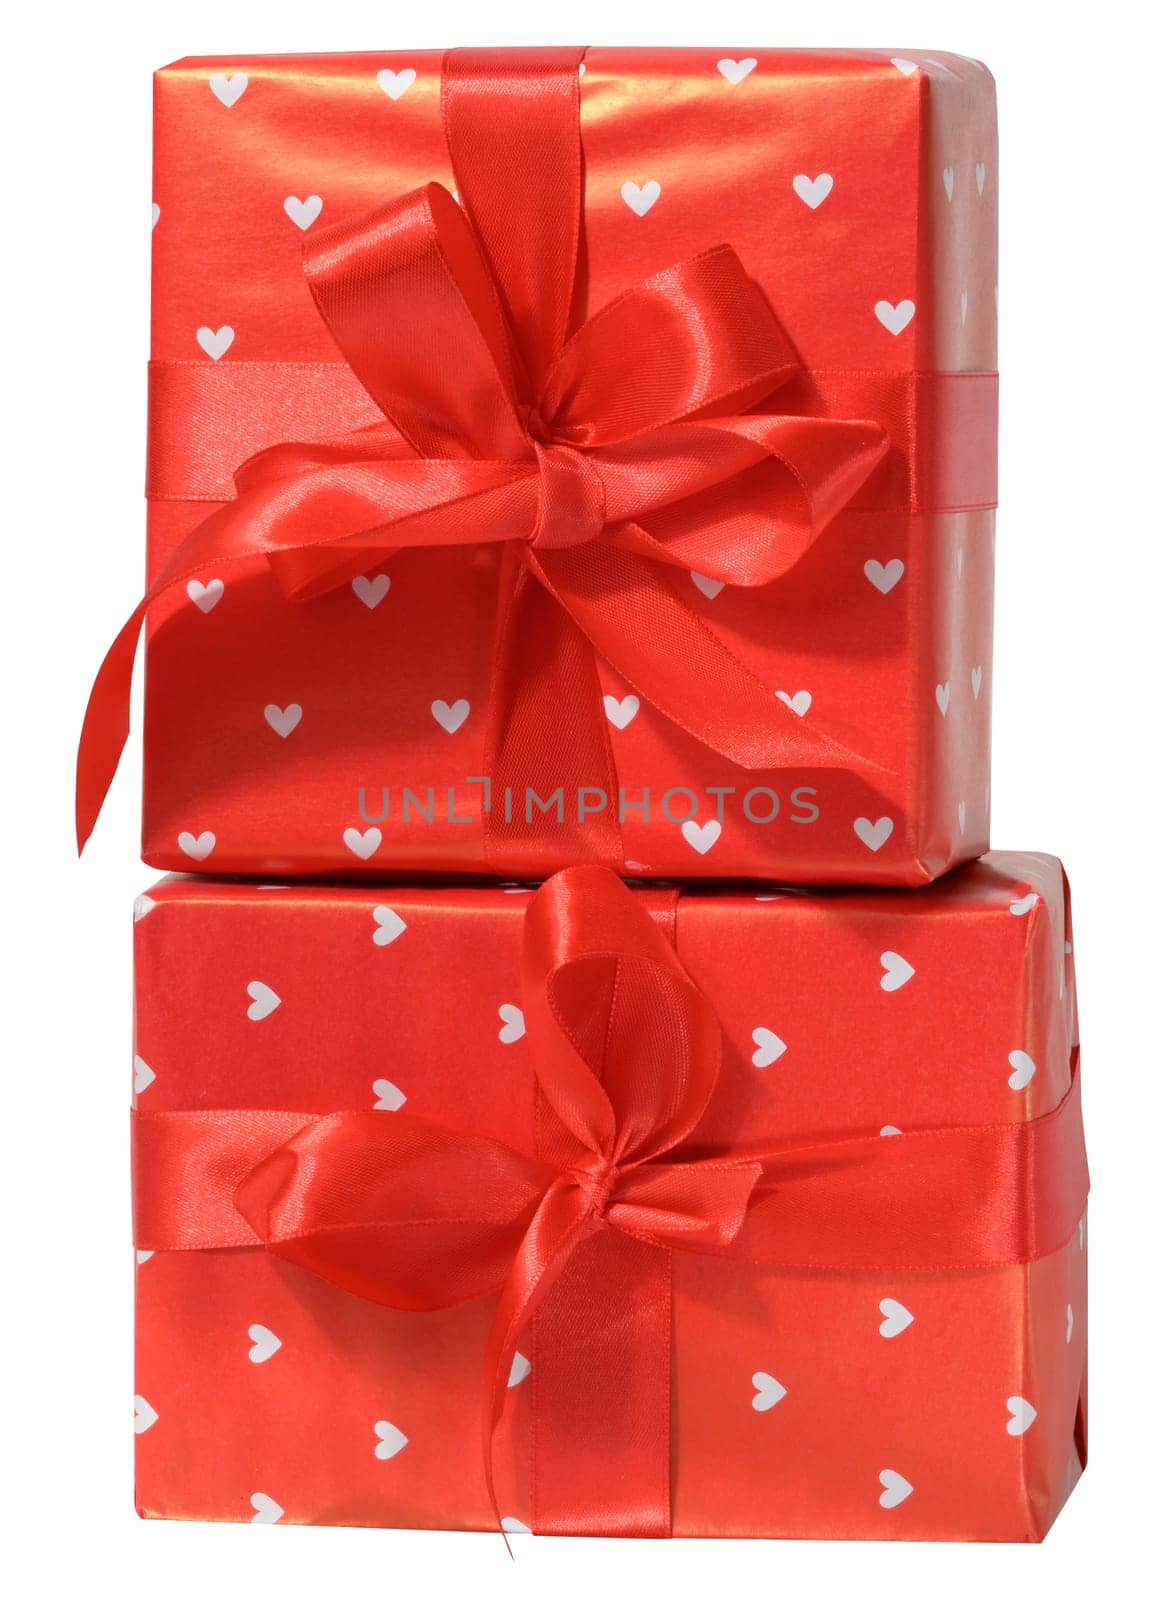 Box is wrapped in red gift wrapping and red ribbon on a white isolated background